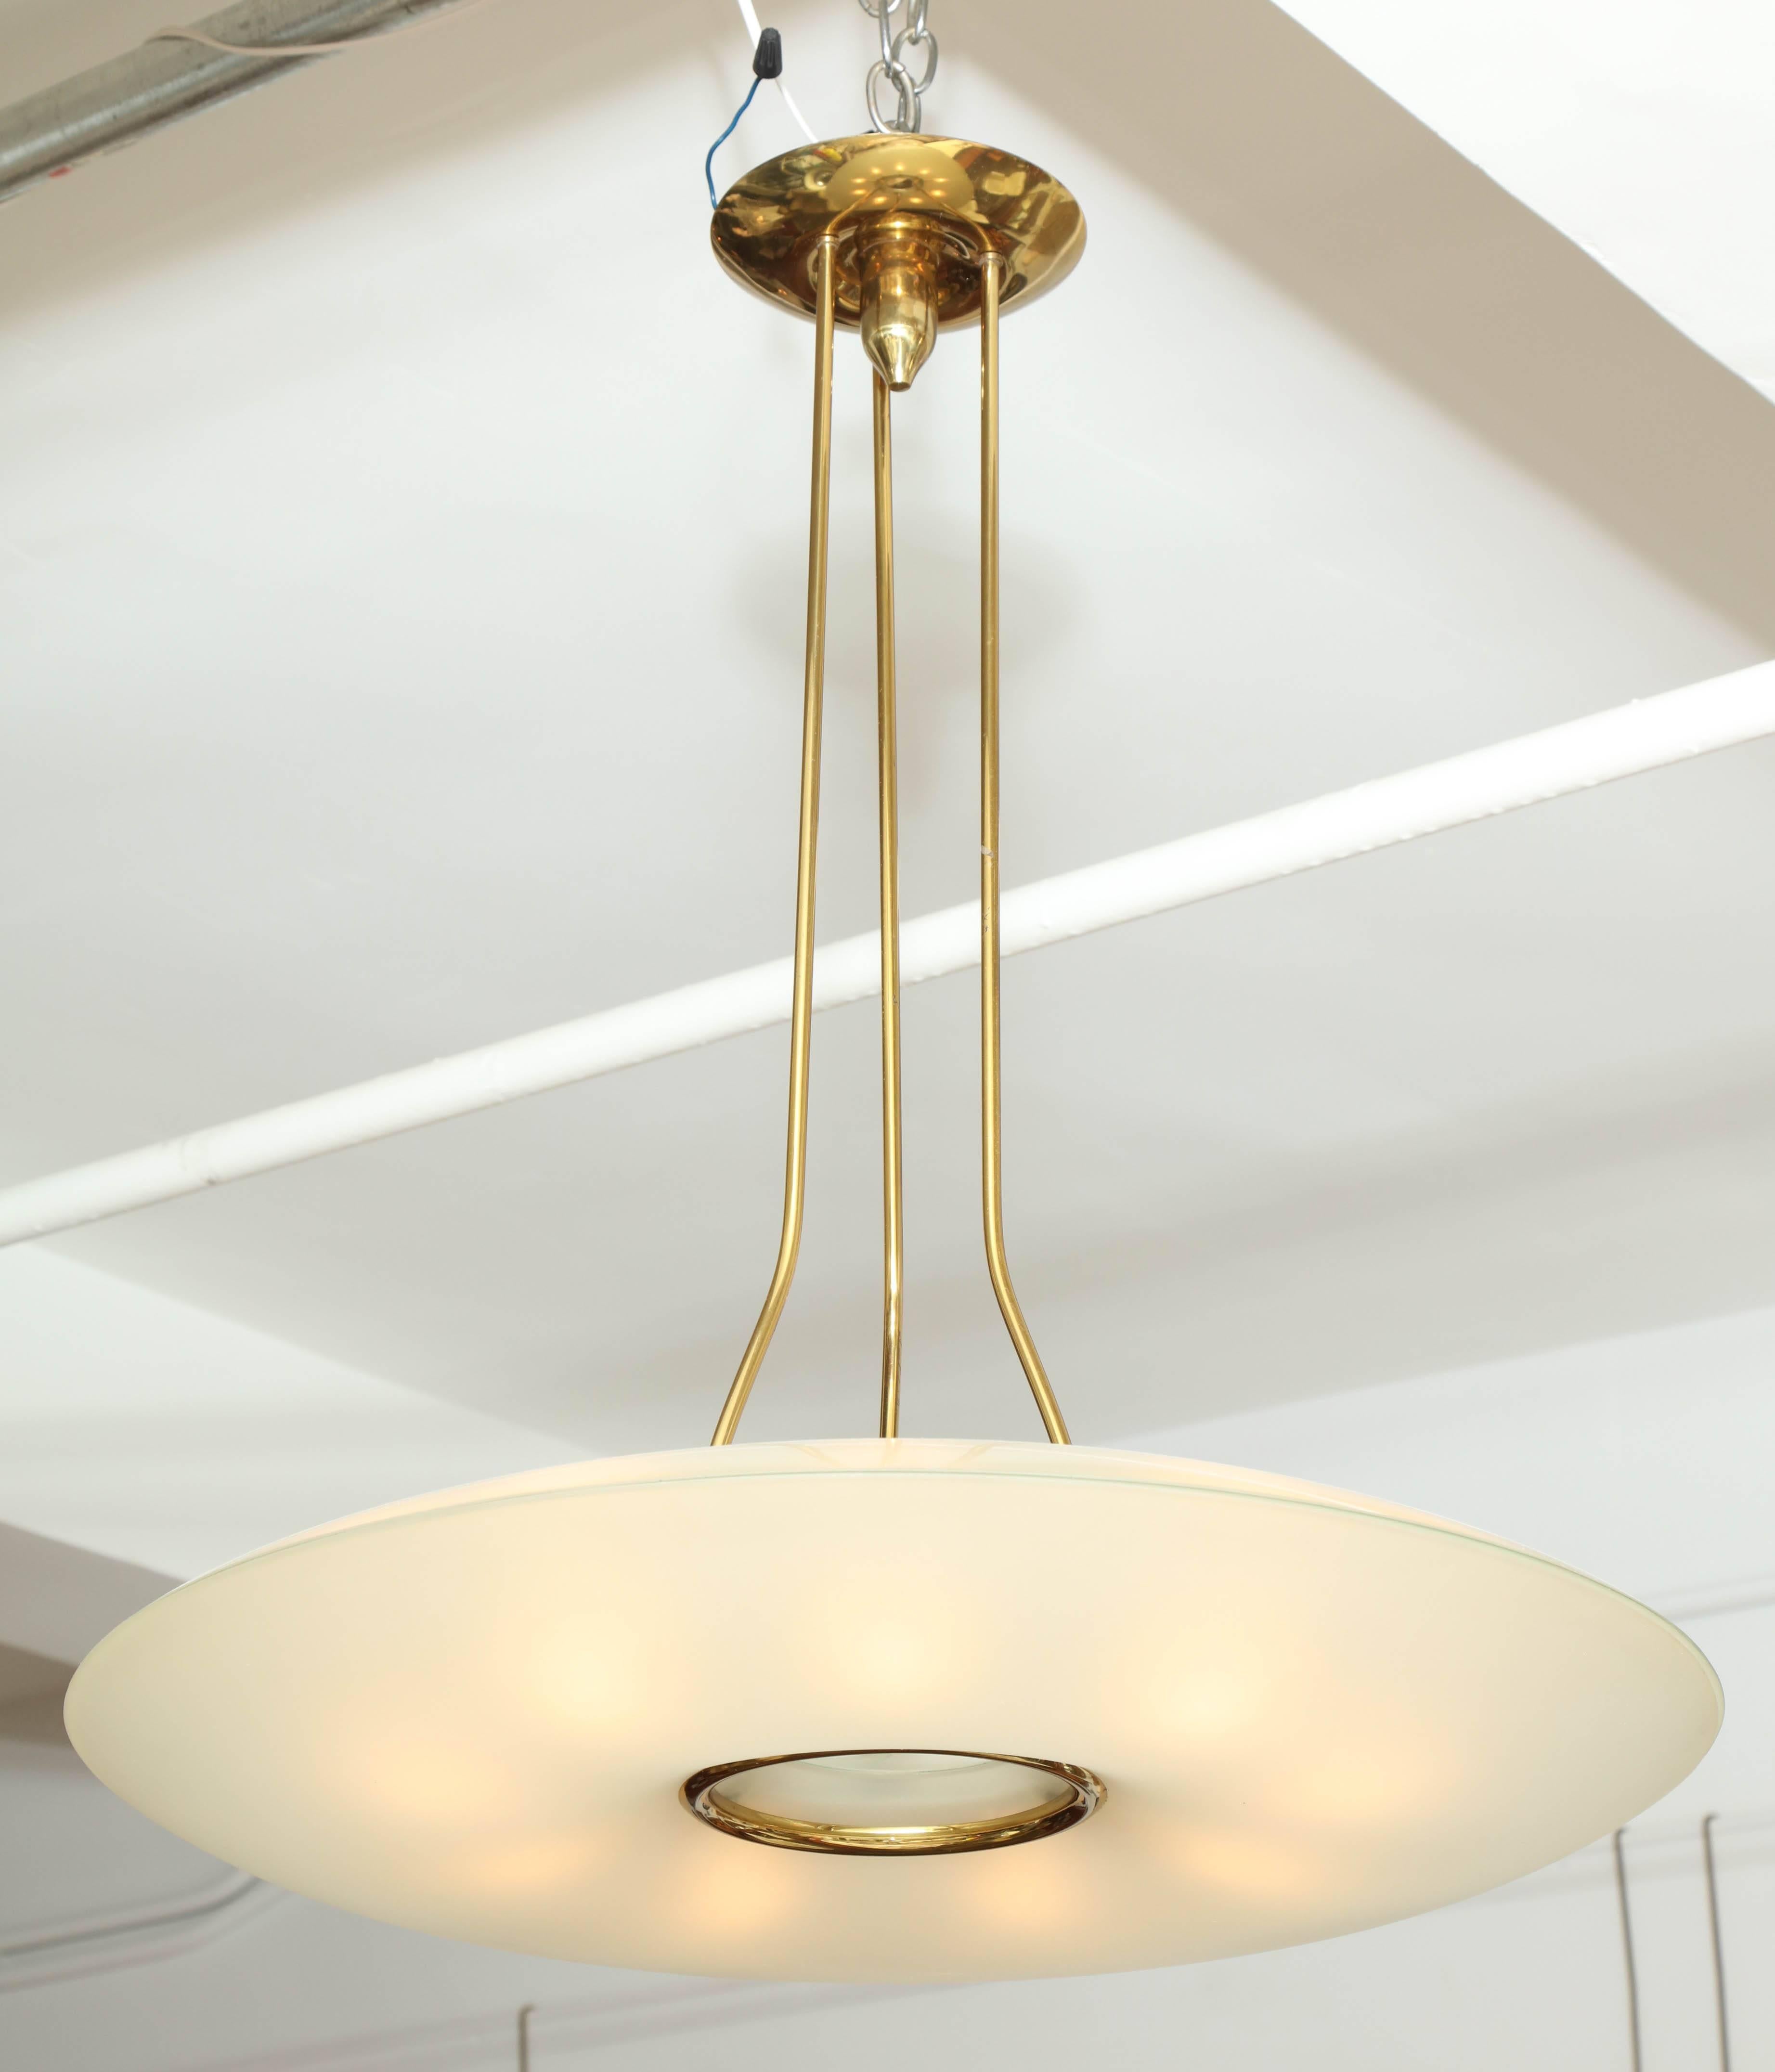 Stunning round Fontana Arte nine-light chandelier made in Milan 1955 designed by Max Ingrand. Two large curved acid etched glass shades mounted onto a hand made brass frame. This chandelier is unusual in the sense that it still has it's top half